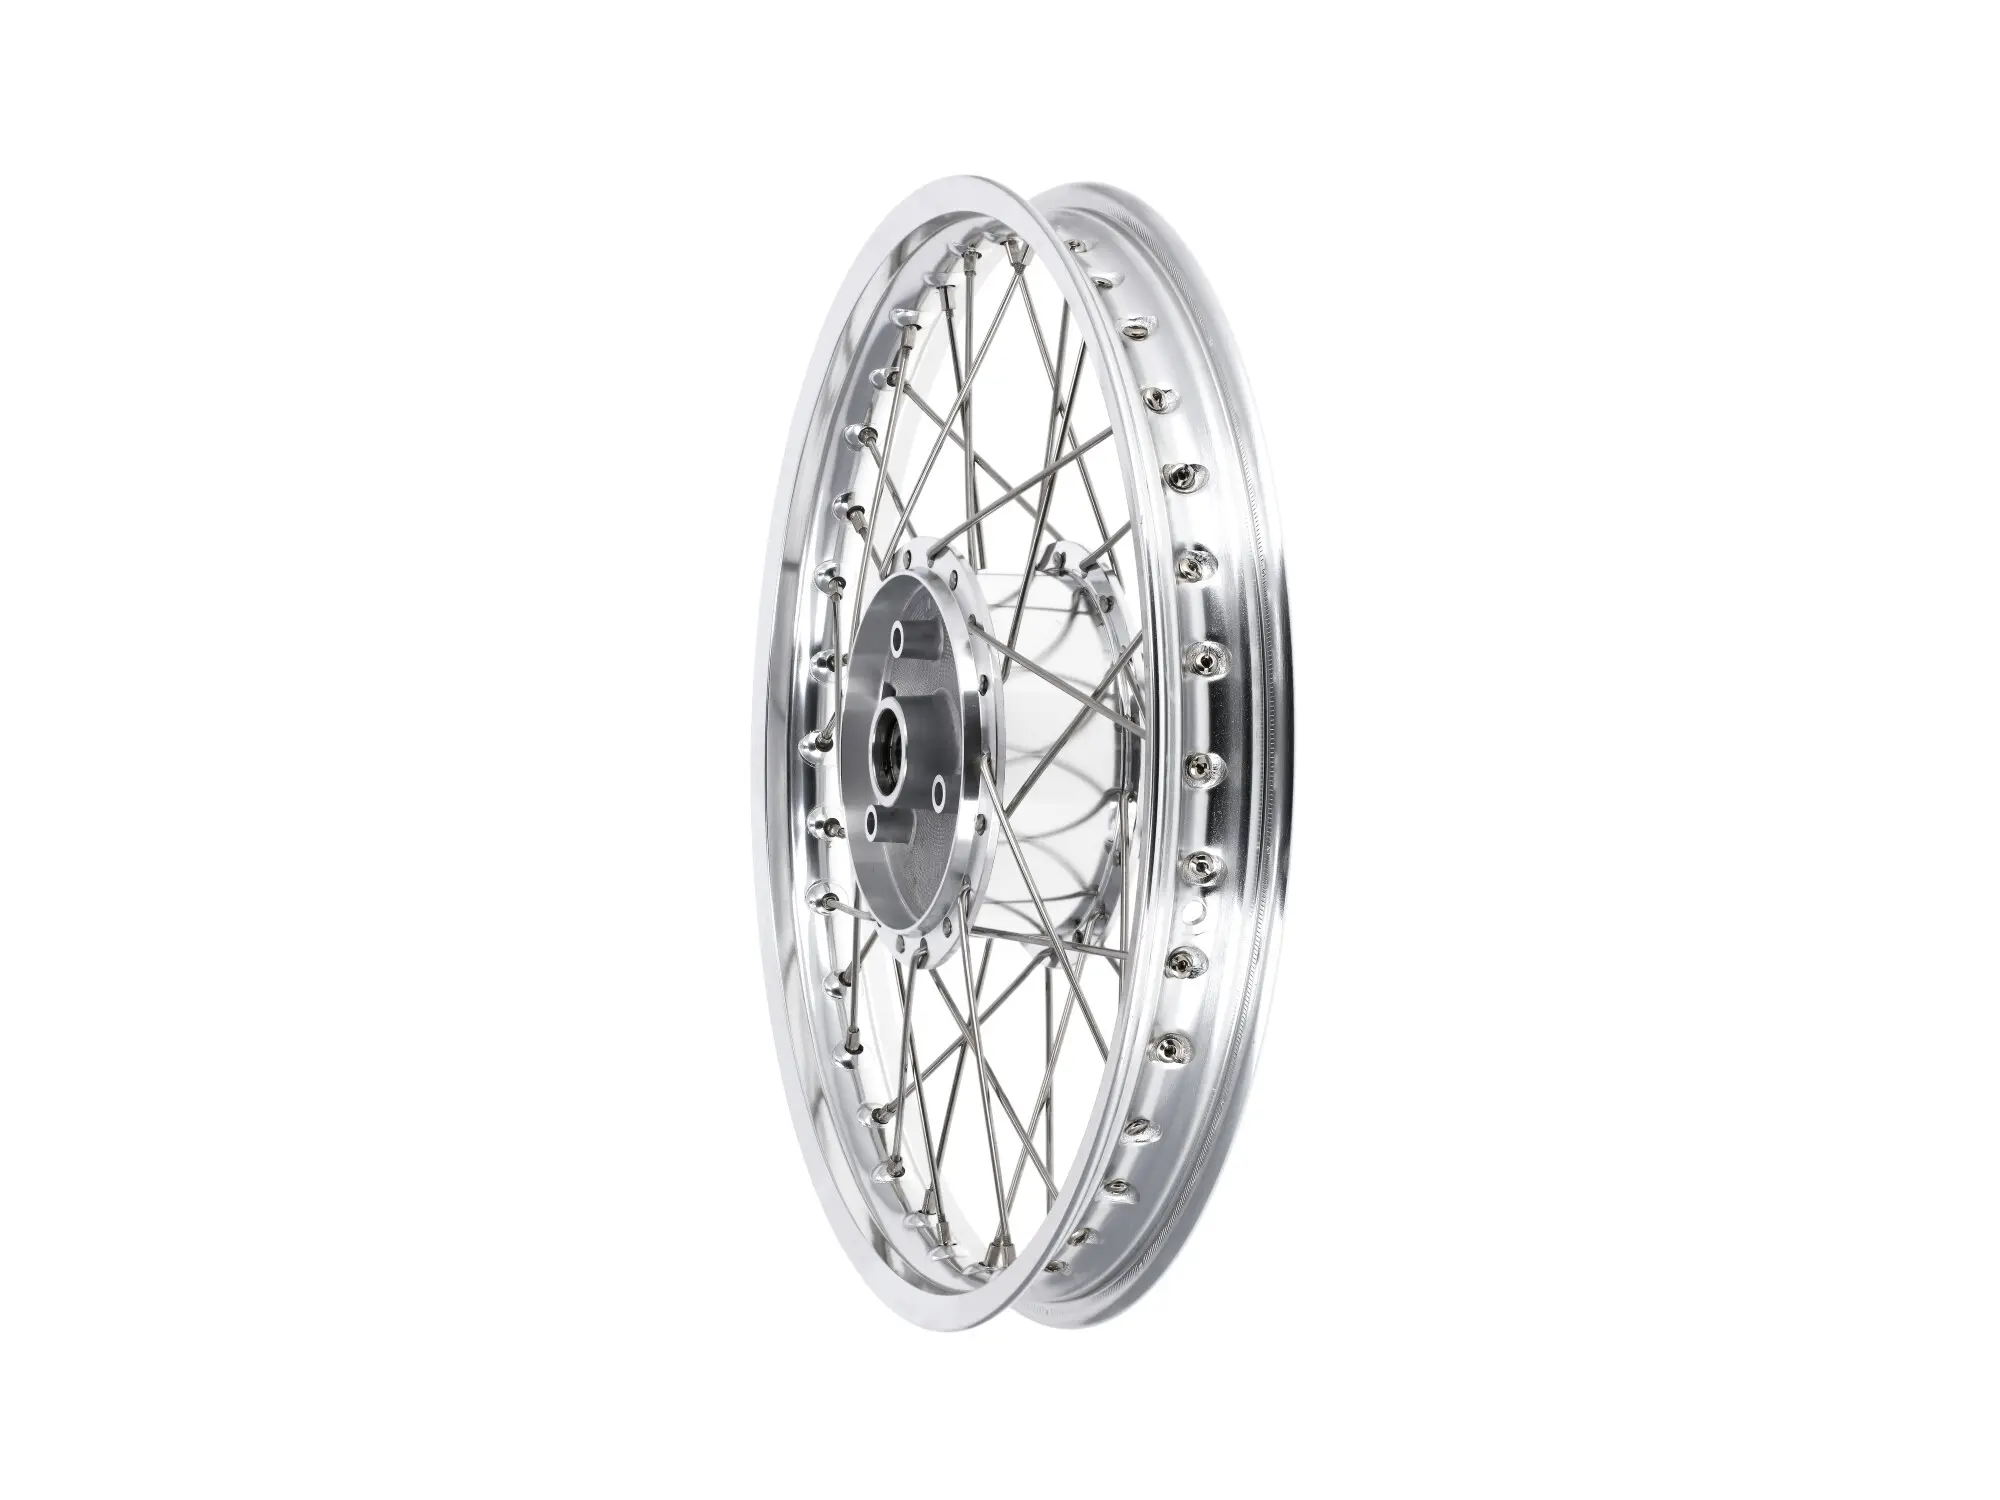 Tuning spoke wheel 1.5 x 16" polished alloy rim + stainless steel spokes - for Simson S51, S50, KR51 Schwalbe, SR4, Item no: 10070095 - Image 1